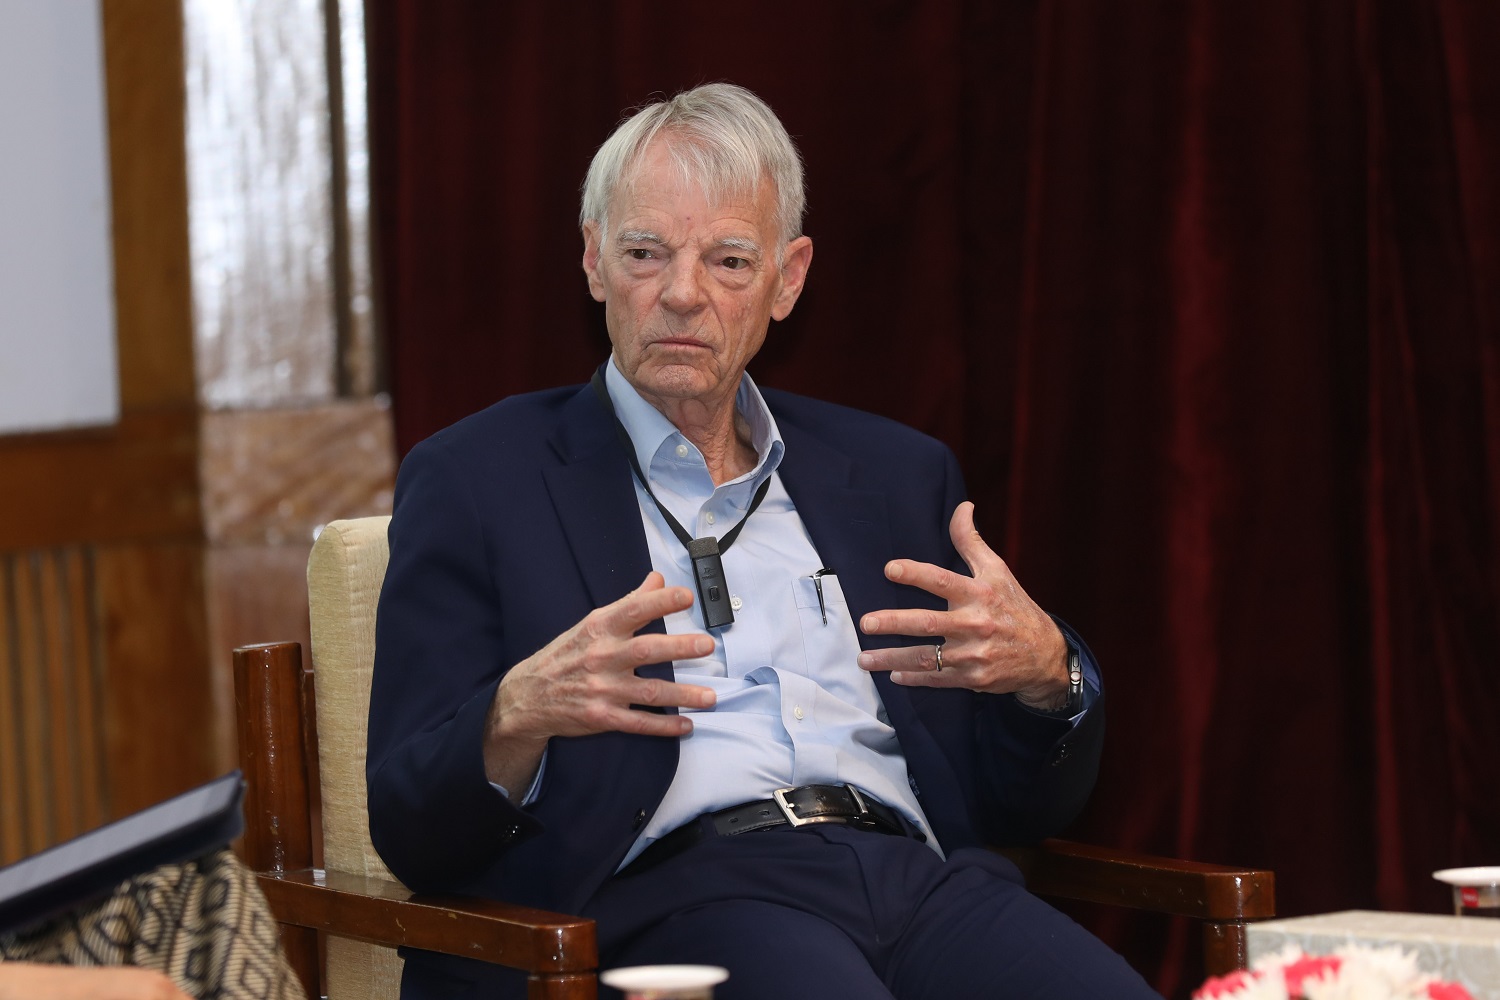 Prof. Michael Spence speaks about his contributions to Contract Theory/Microeconomics for which he received the Nobel Prize, the world economy and India’s role in the world economy. 